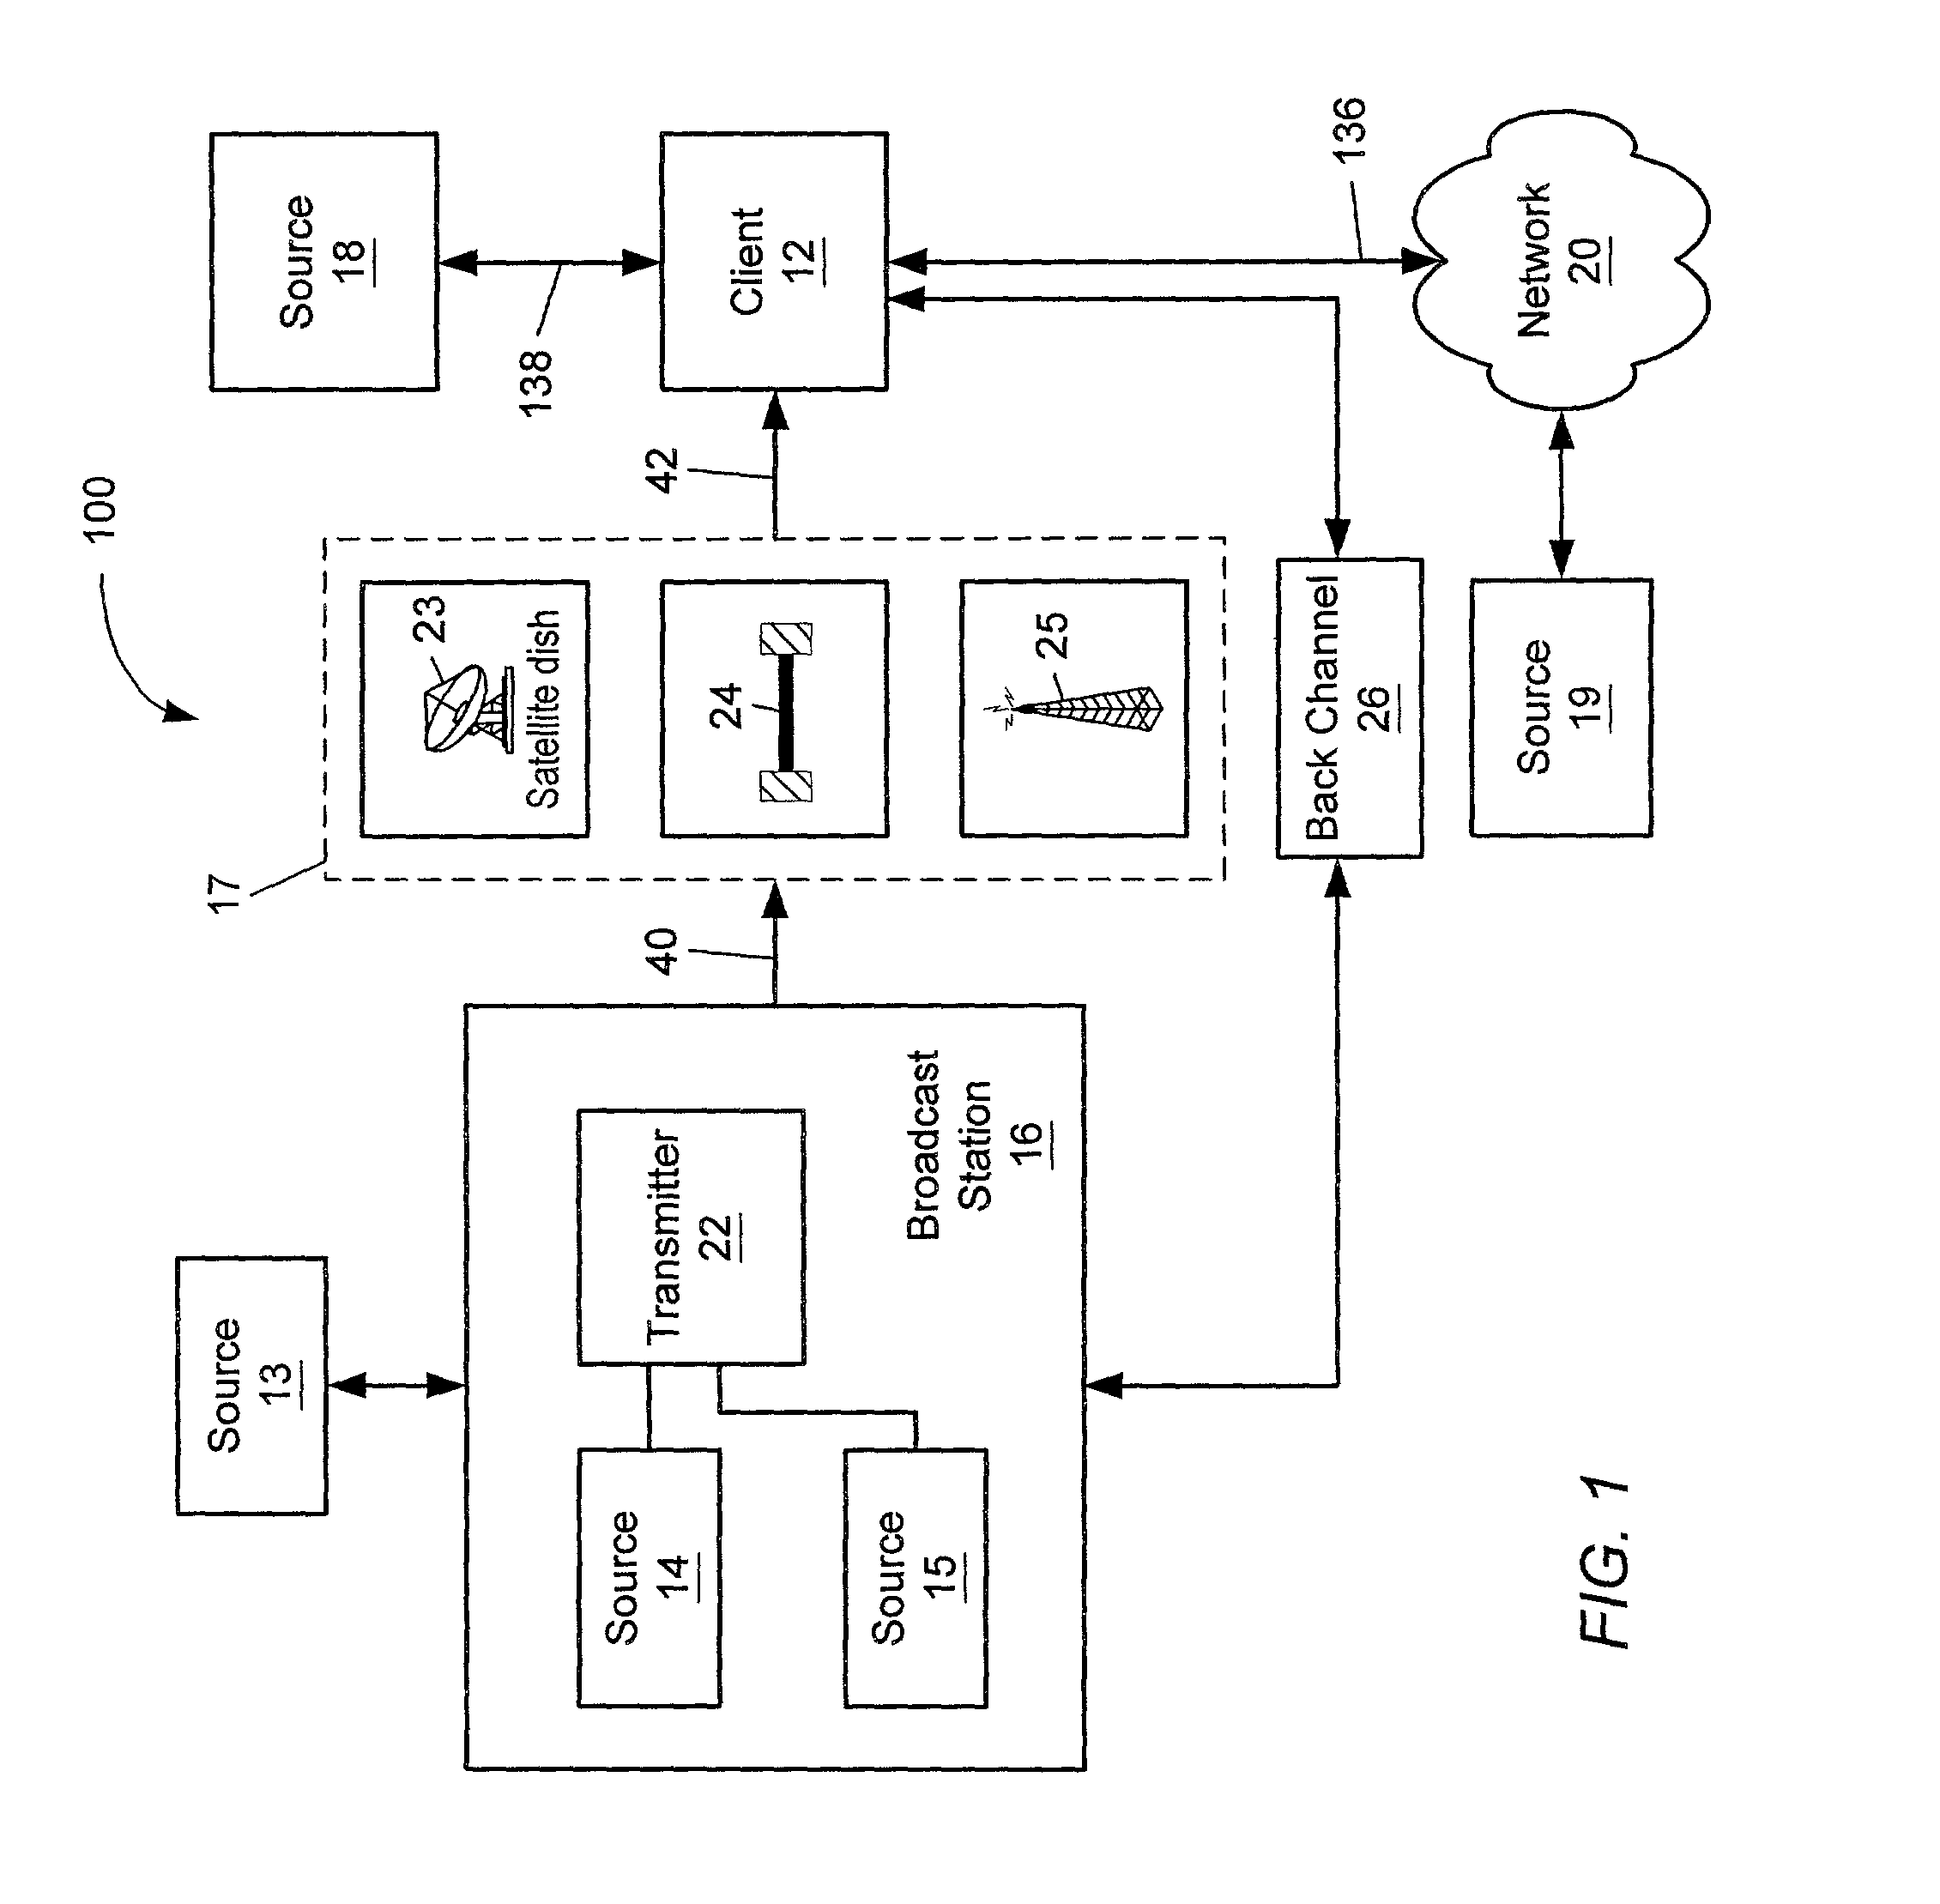 Utilization of relational metadata in a television system